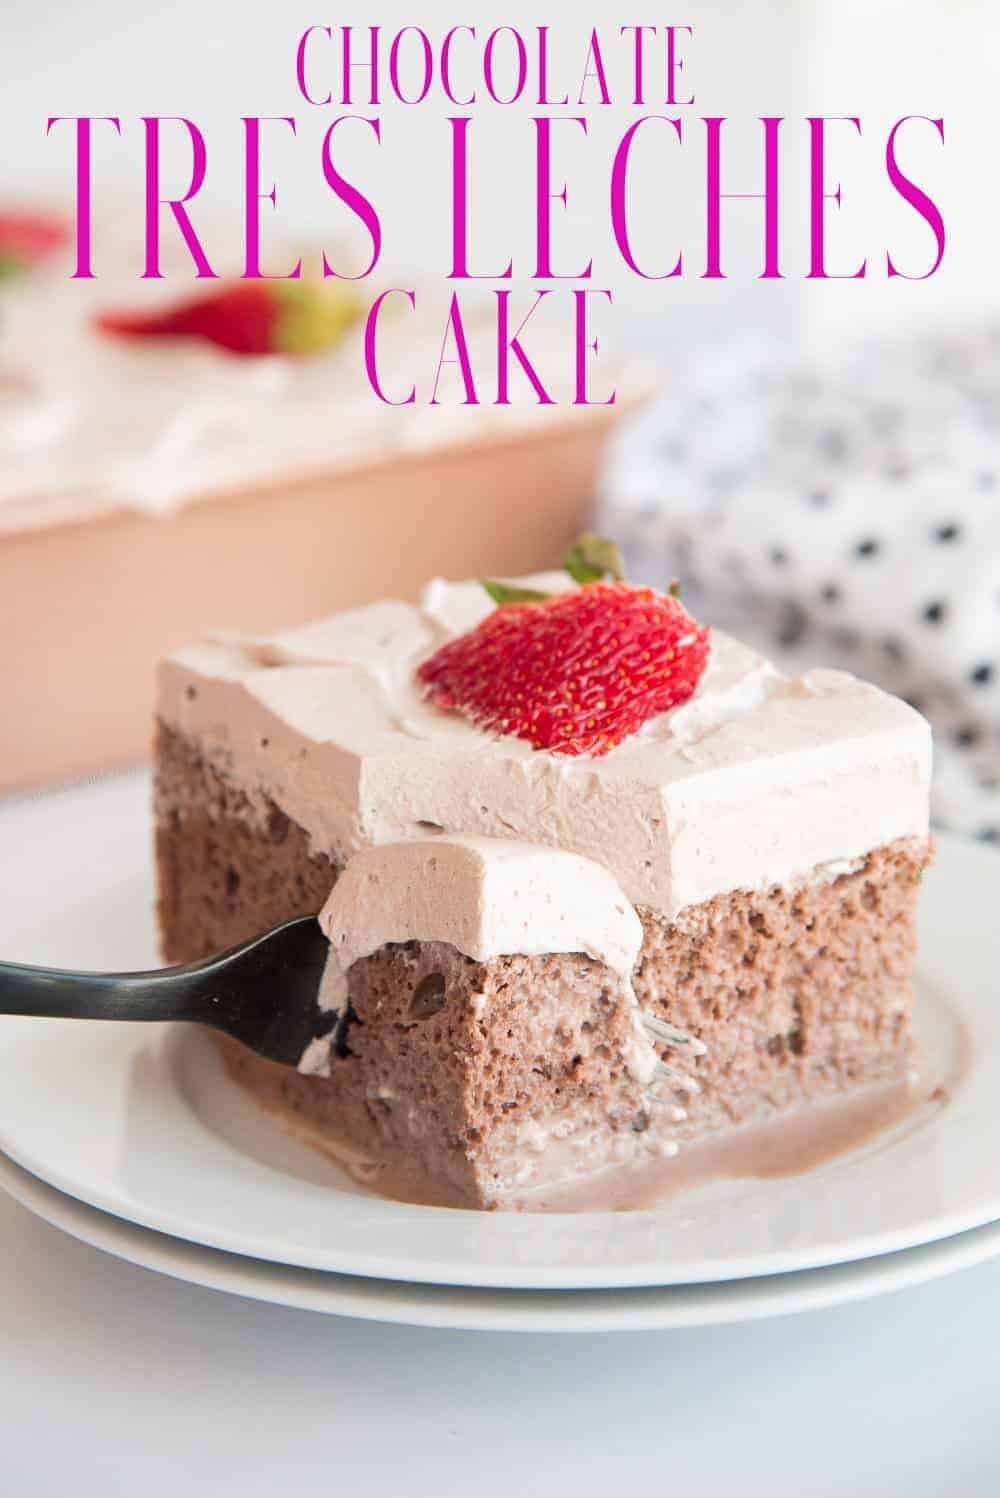 Chocolate Tres Leches Cake take the popular Latin American dessert and makes it more decadent with a malted chocolate milk bath. Top yours with light, fluffy chocolate whipped cream and fresh berries. This is a perfect Cinco de Mayo or celebration cake, which is sure to please your entire family. #chocolatetresleches #treslechescake #tresleches #cake #chocolatecake #chocolatewhippedcream #CincodeMayodessert #CincodeMayoRecipes #Hispanicrecipes #PuertoRicanRecipes.  via @ediblesense